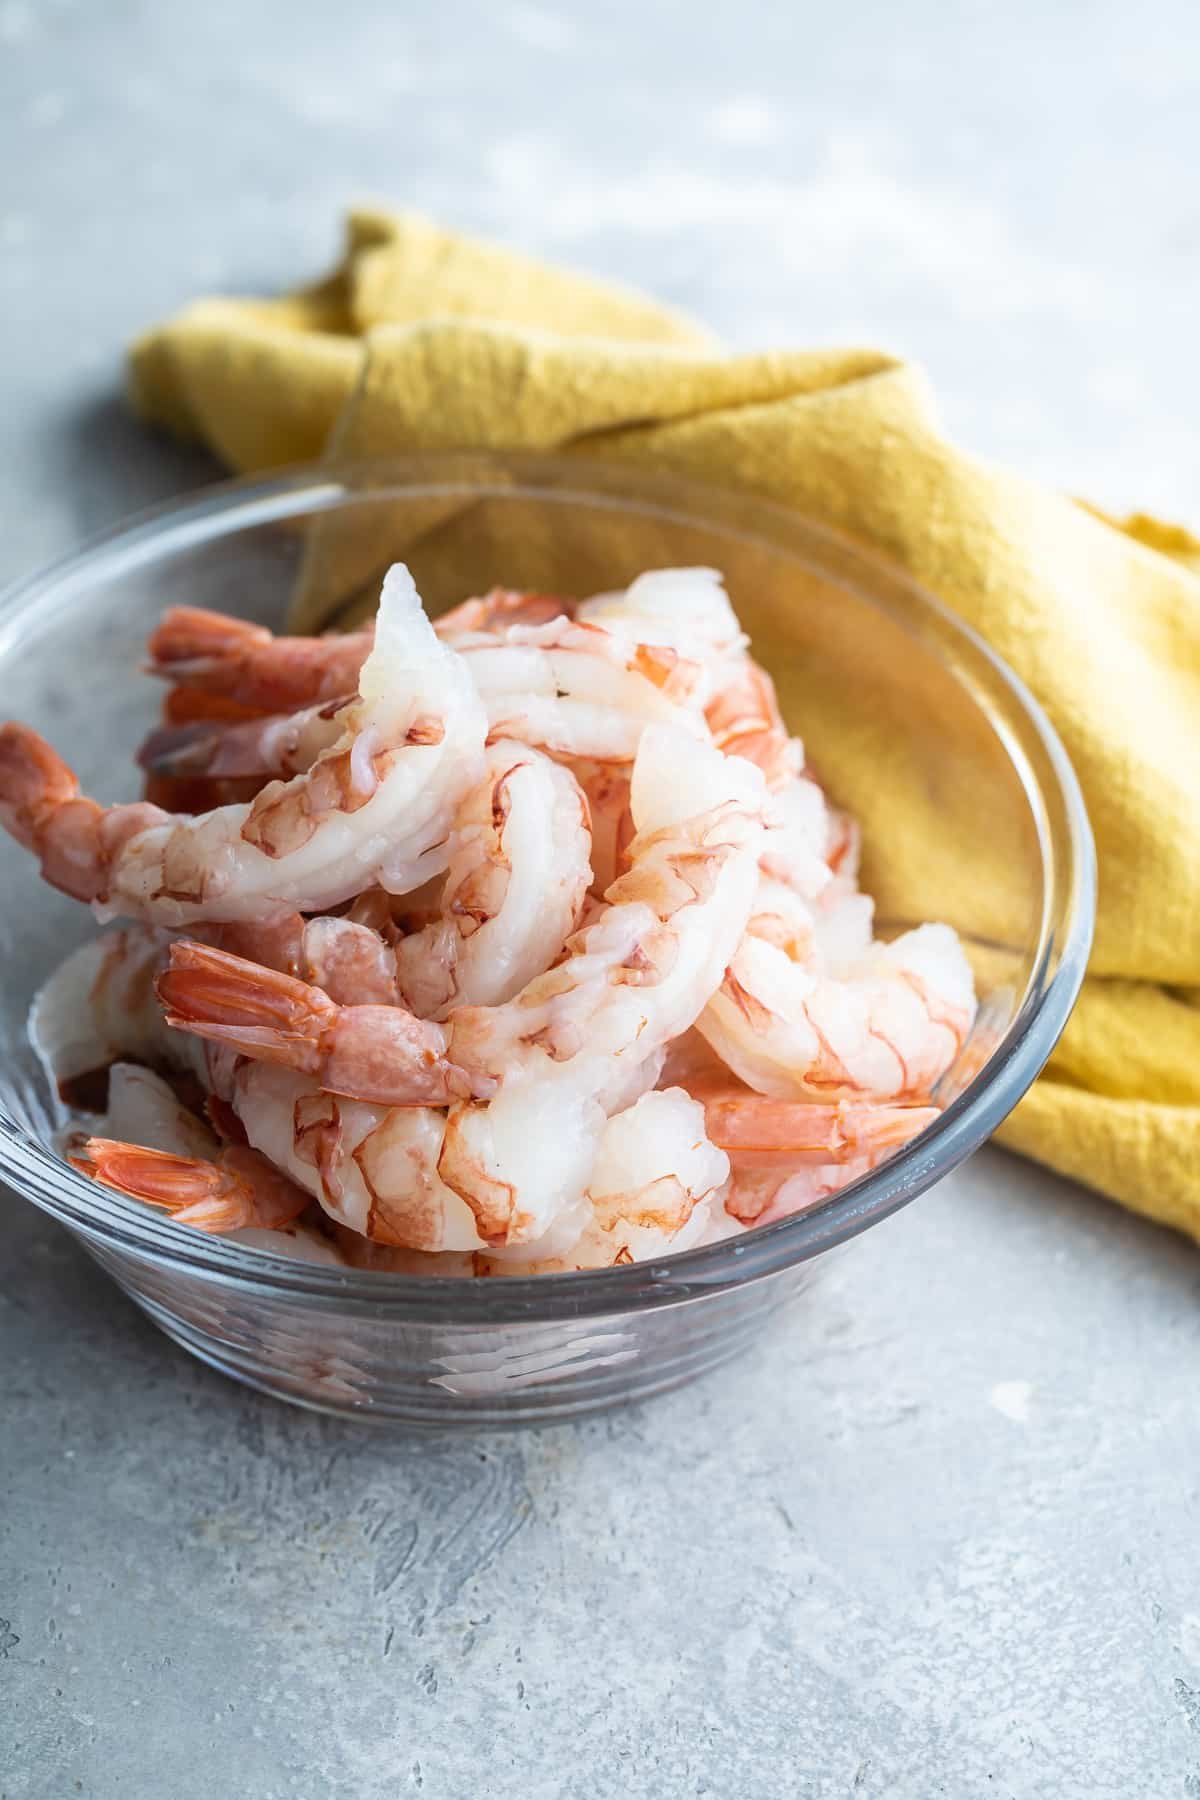 A bowl of peeled and deveined shrimp.